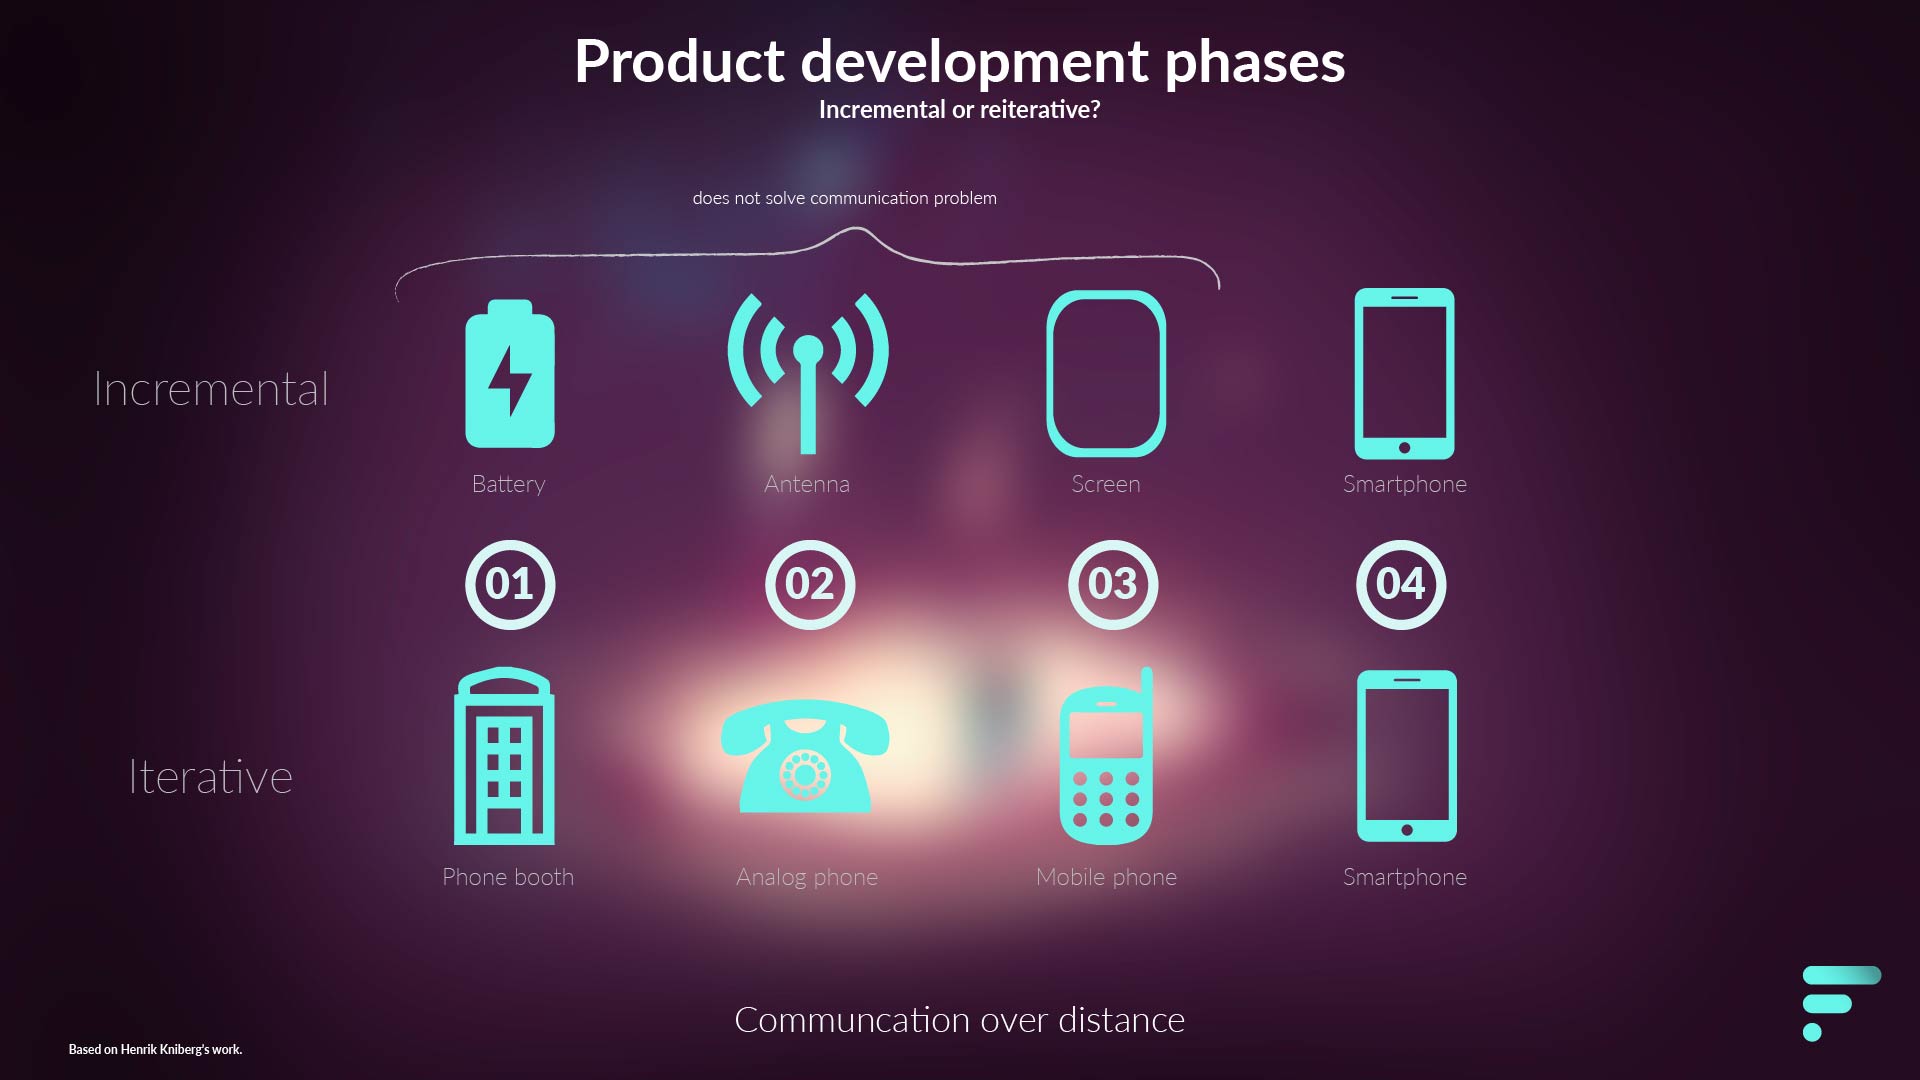 Product Development Phases - Incremental or Reiterative?